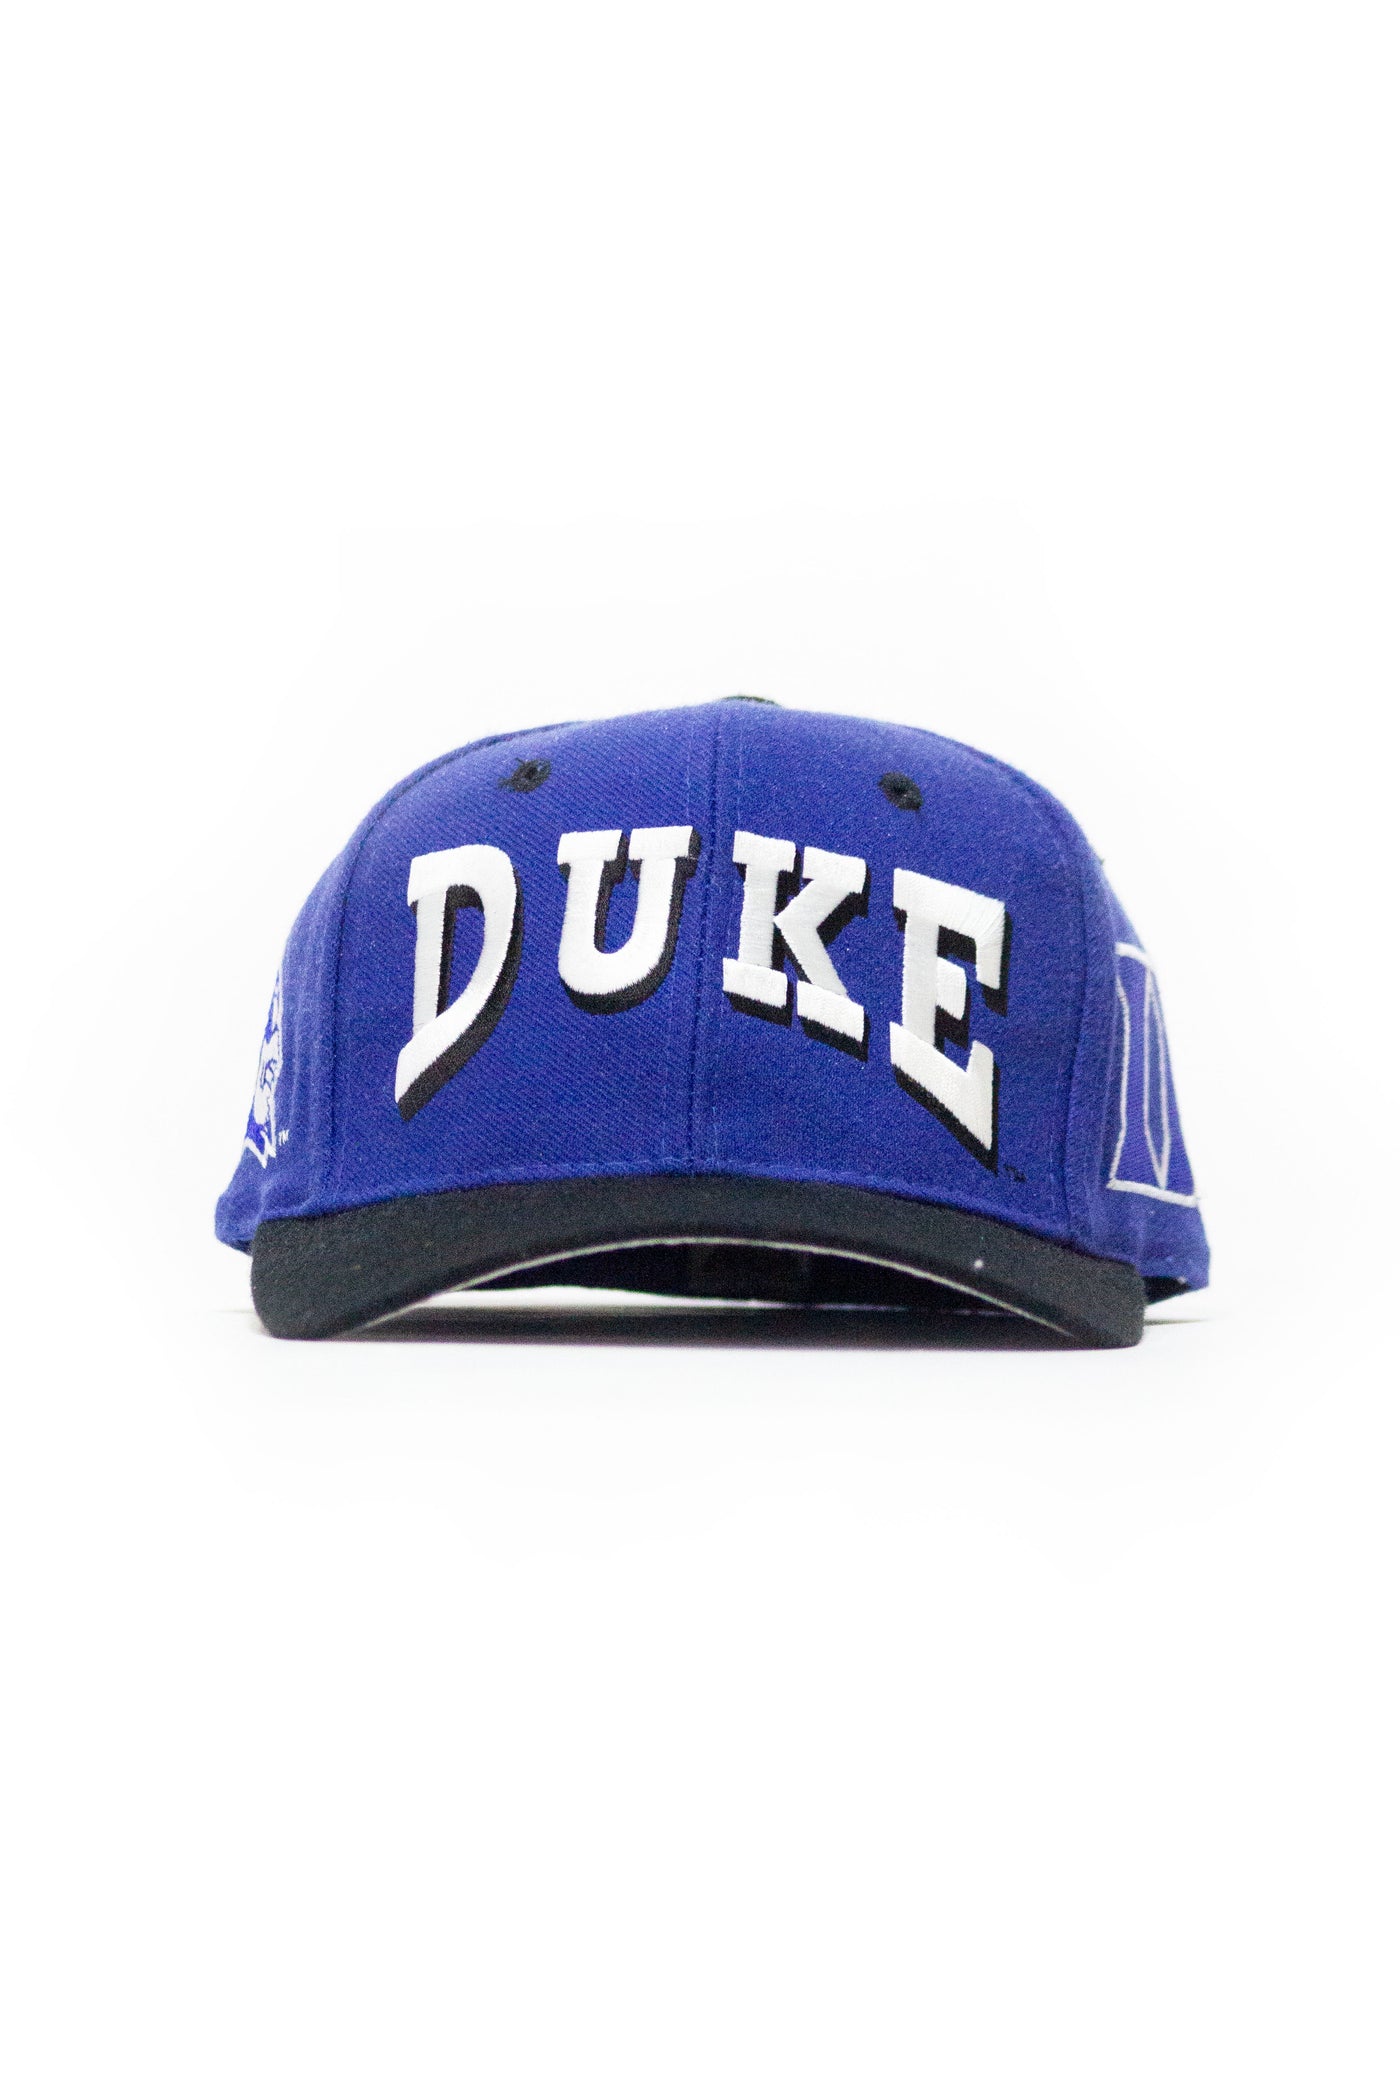 Vintage 90s Duke Fitted Hat